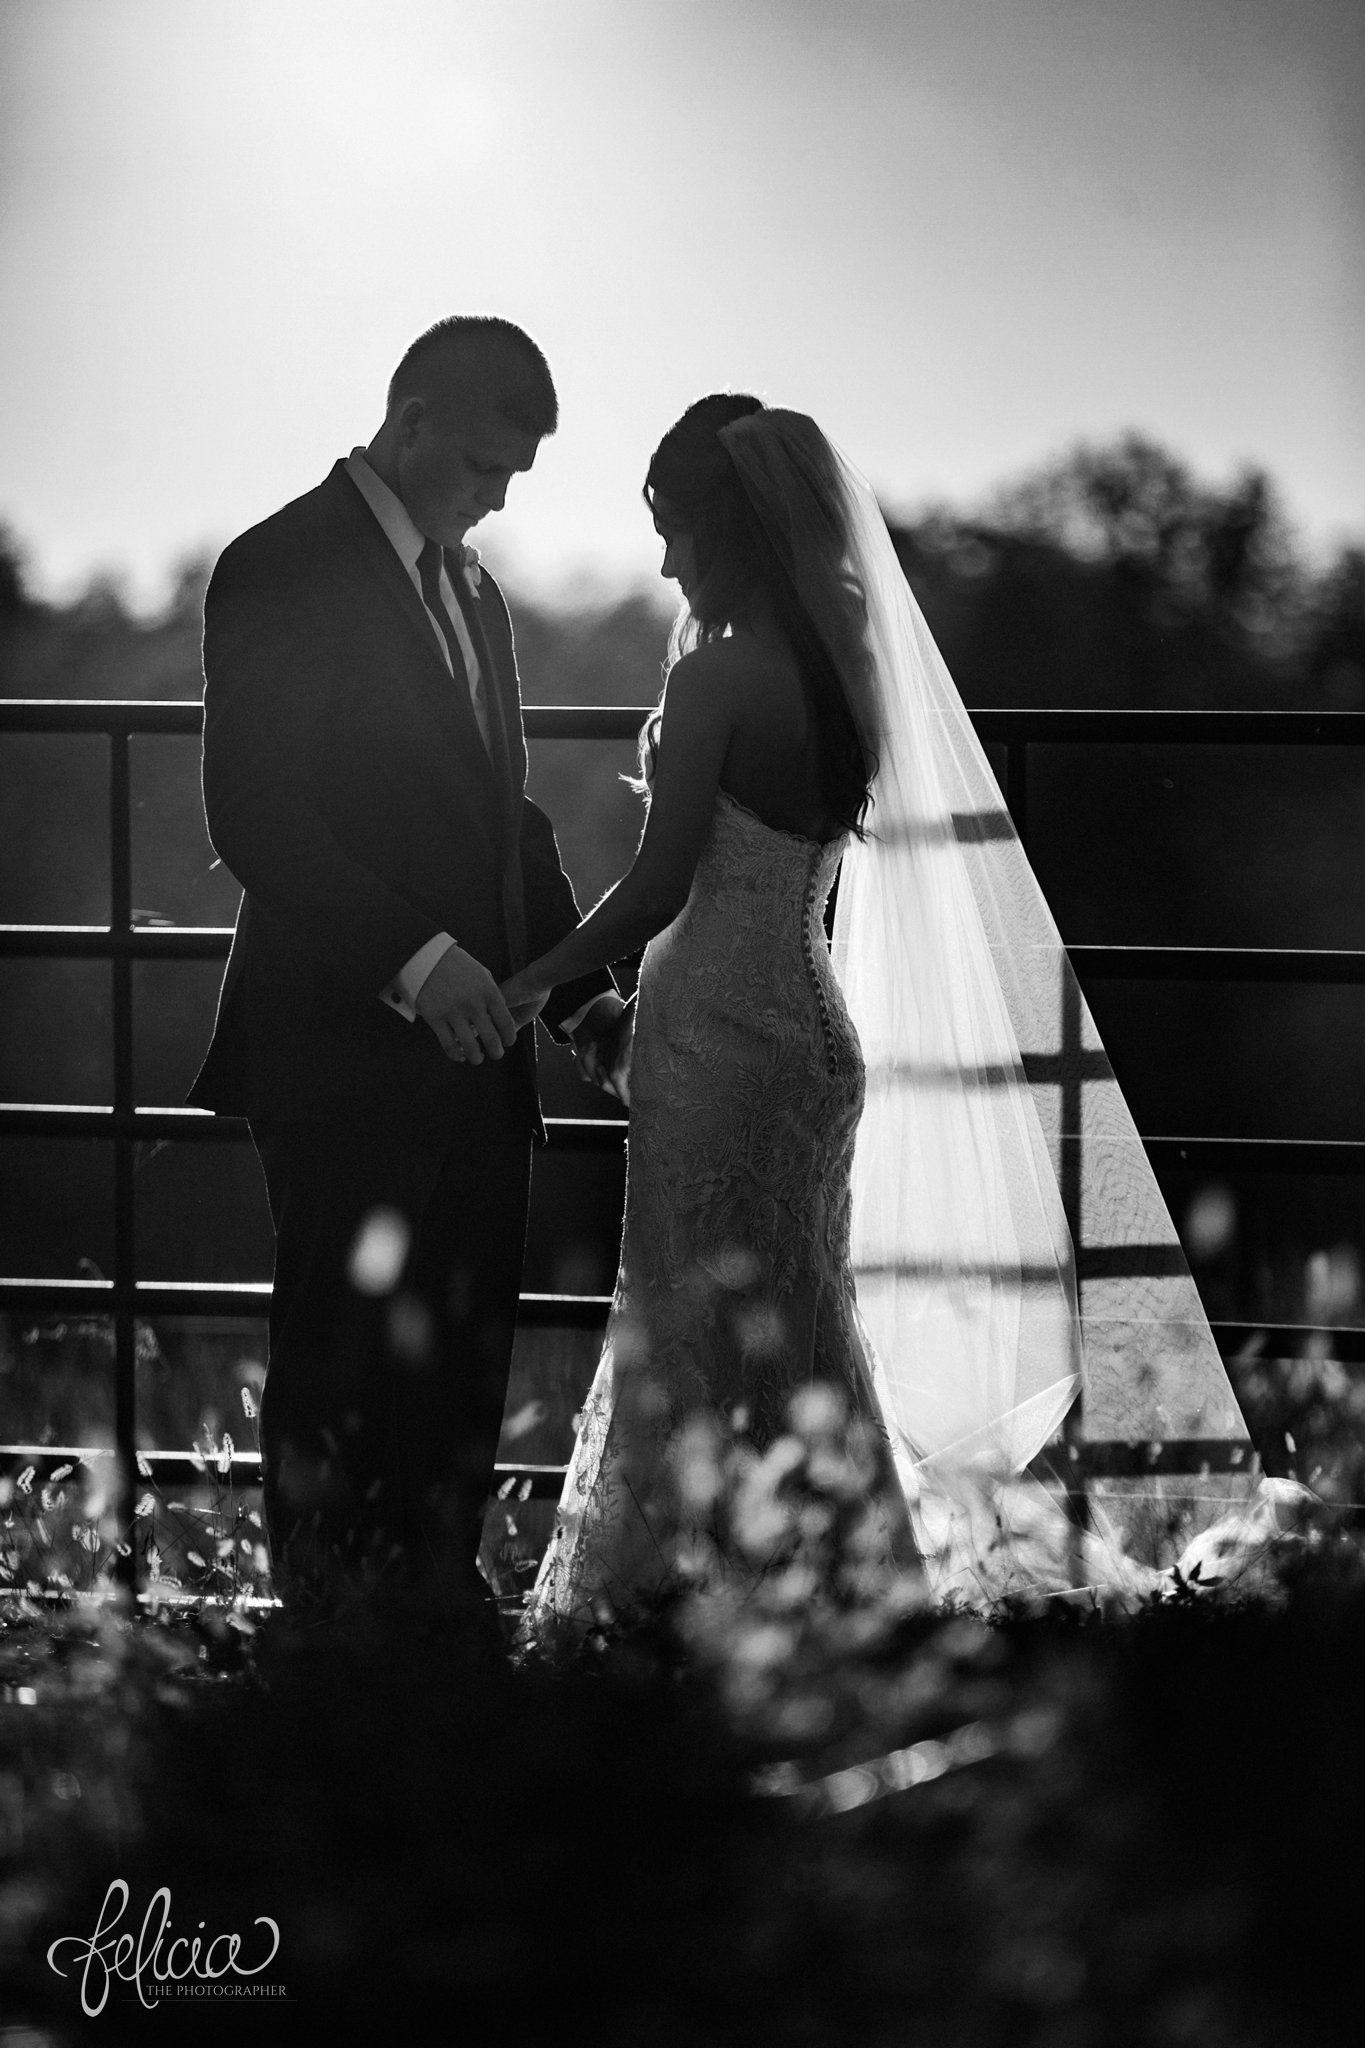 black and white | wedding | wedding photos | Rumely Event Space | wedding photography | images by feliciathephotographer.com | field background | nature | bride and groom portraits | sunlight | romantic sun | romance | sun flare | holding hands | fence | Maggie Sottero 